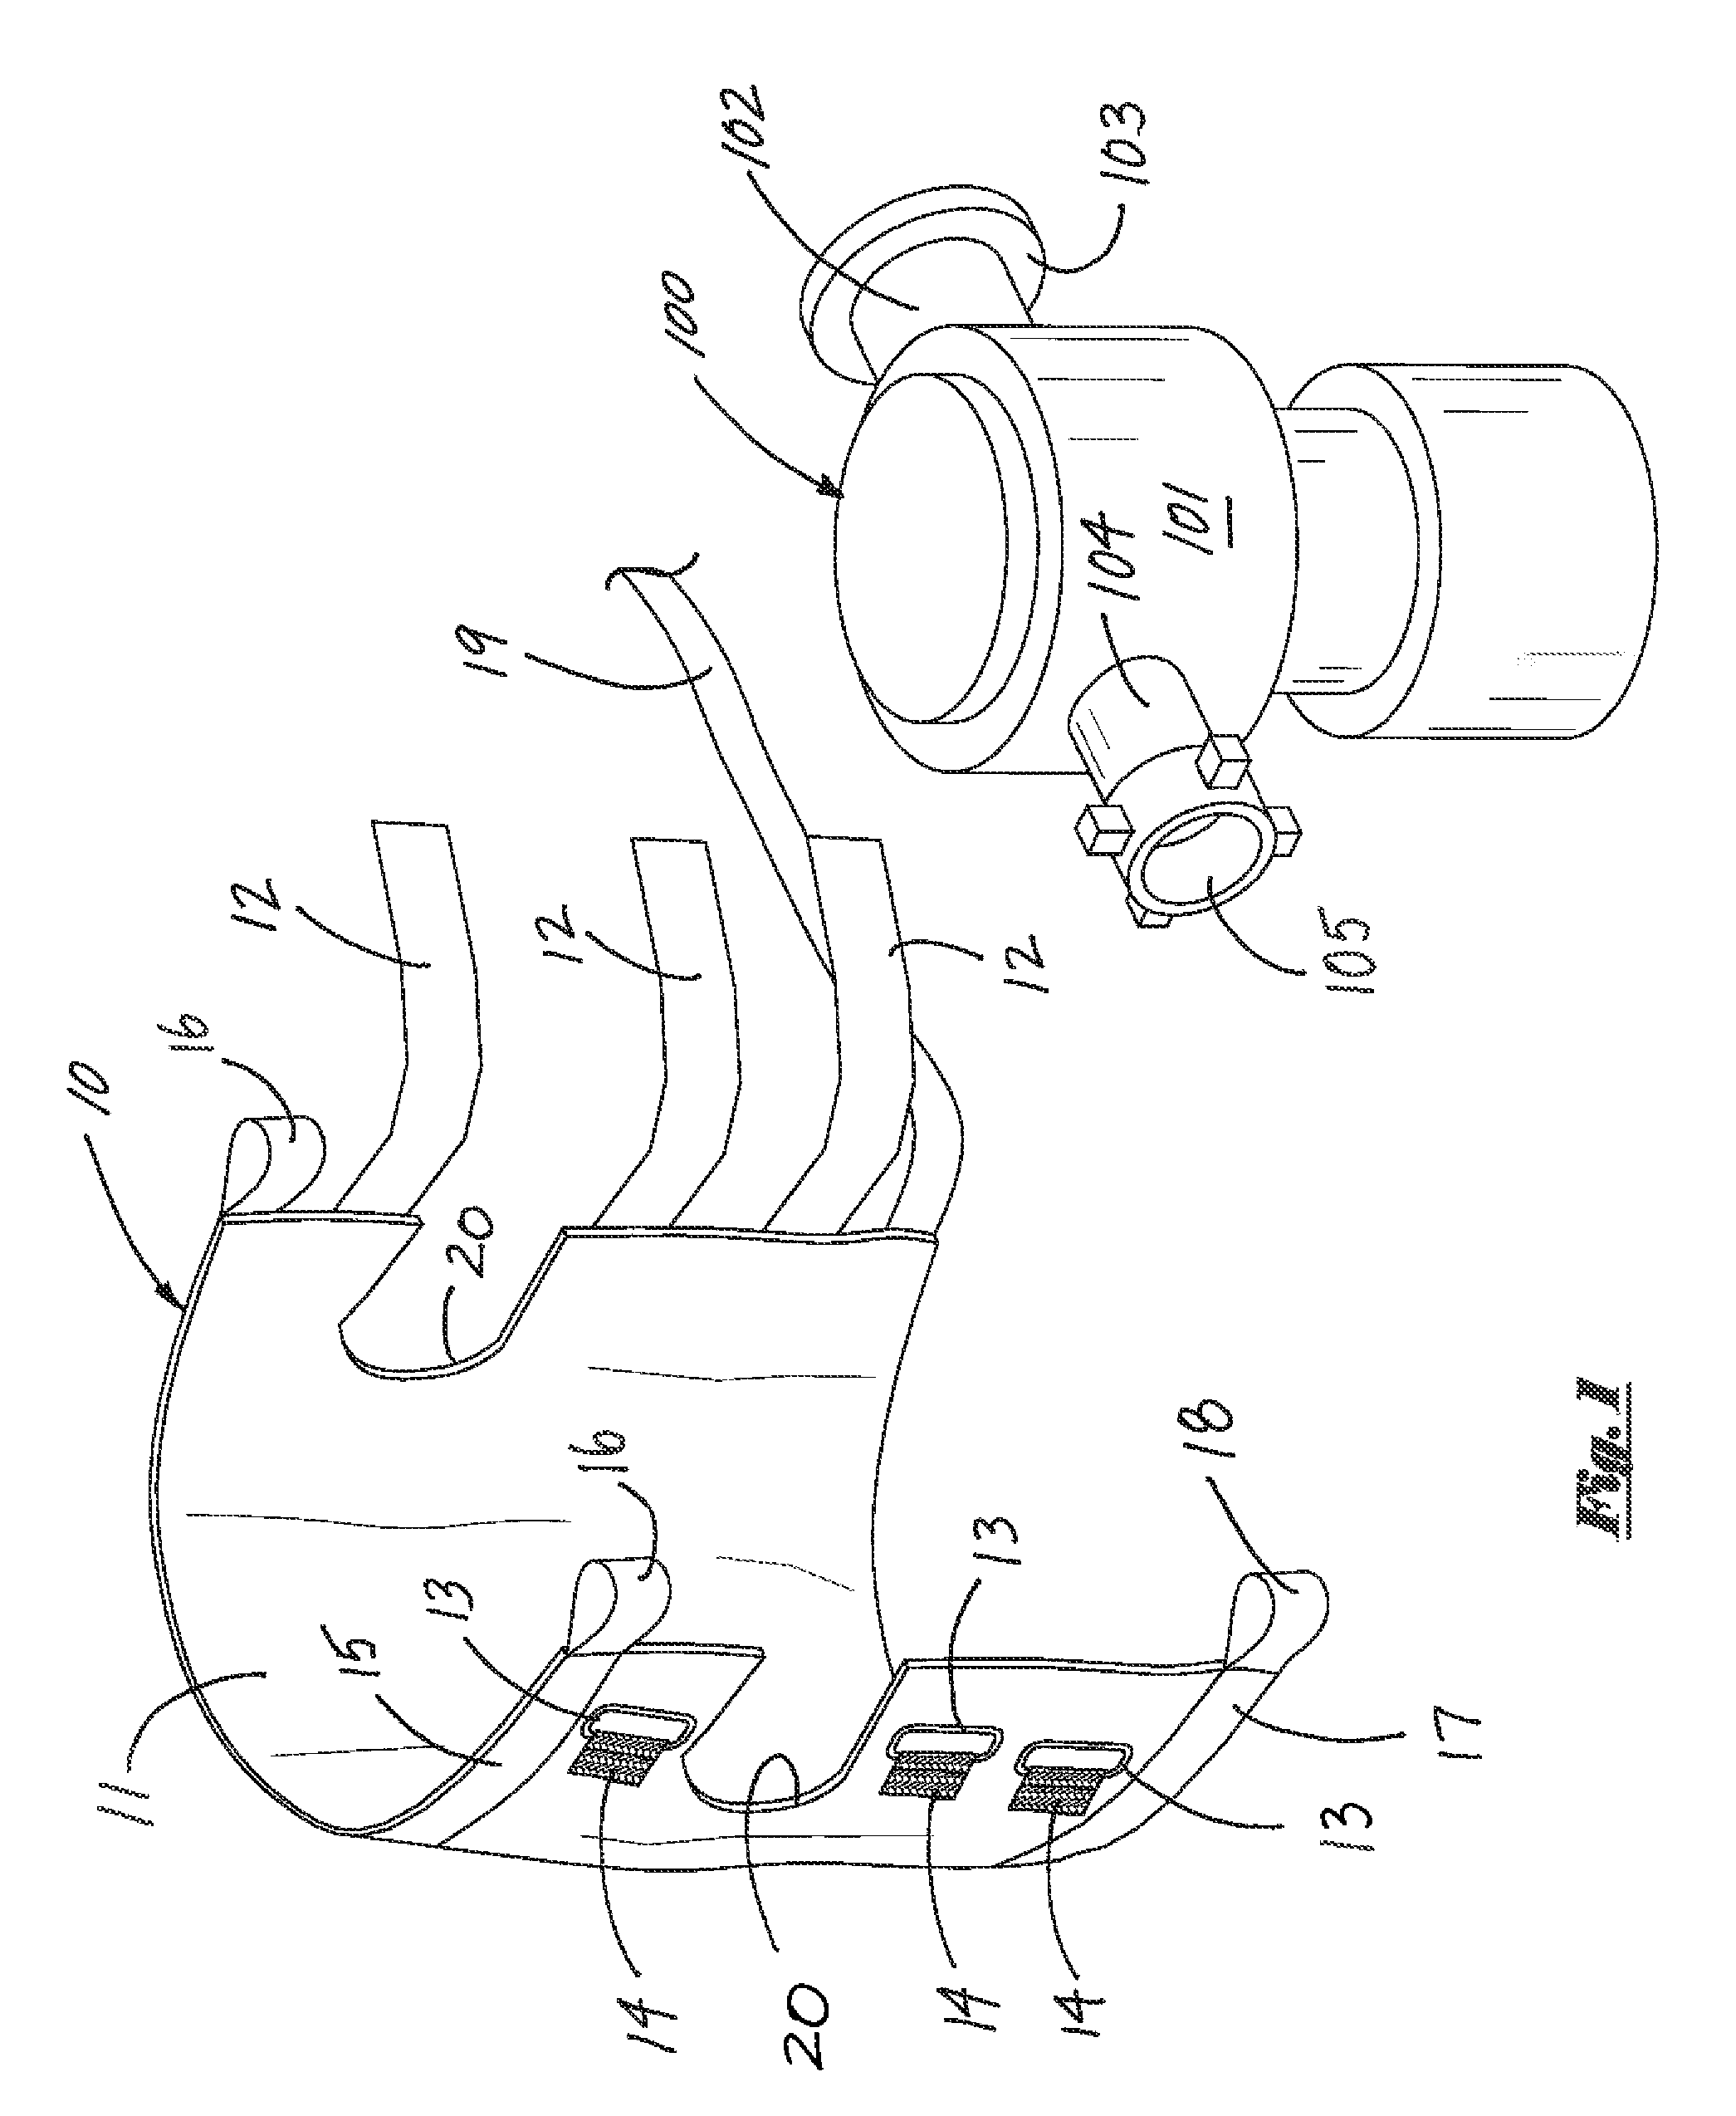 Method and Apparatus for Retaining Elevated Objects